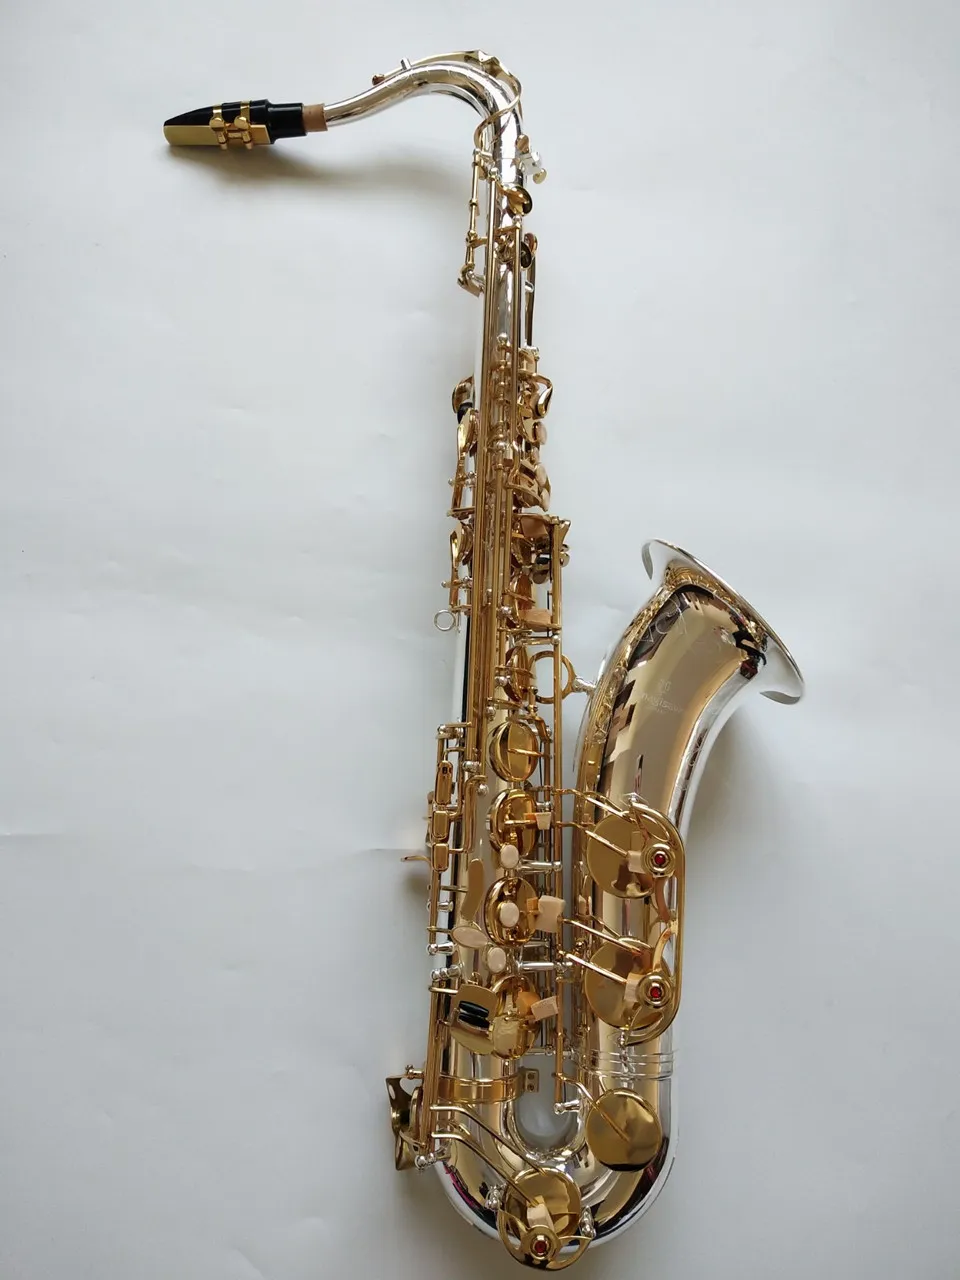 New Tenor Saxophone Yanagisawa T-W037 Musical Instruments Bb Tone Nickel Silver Plated Tube Gold Key Sax With Case Mouthpiece